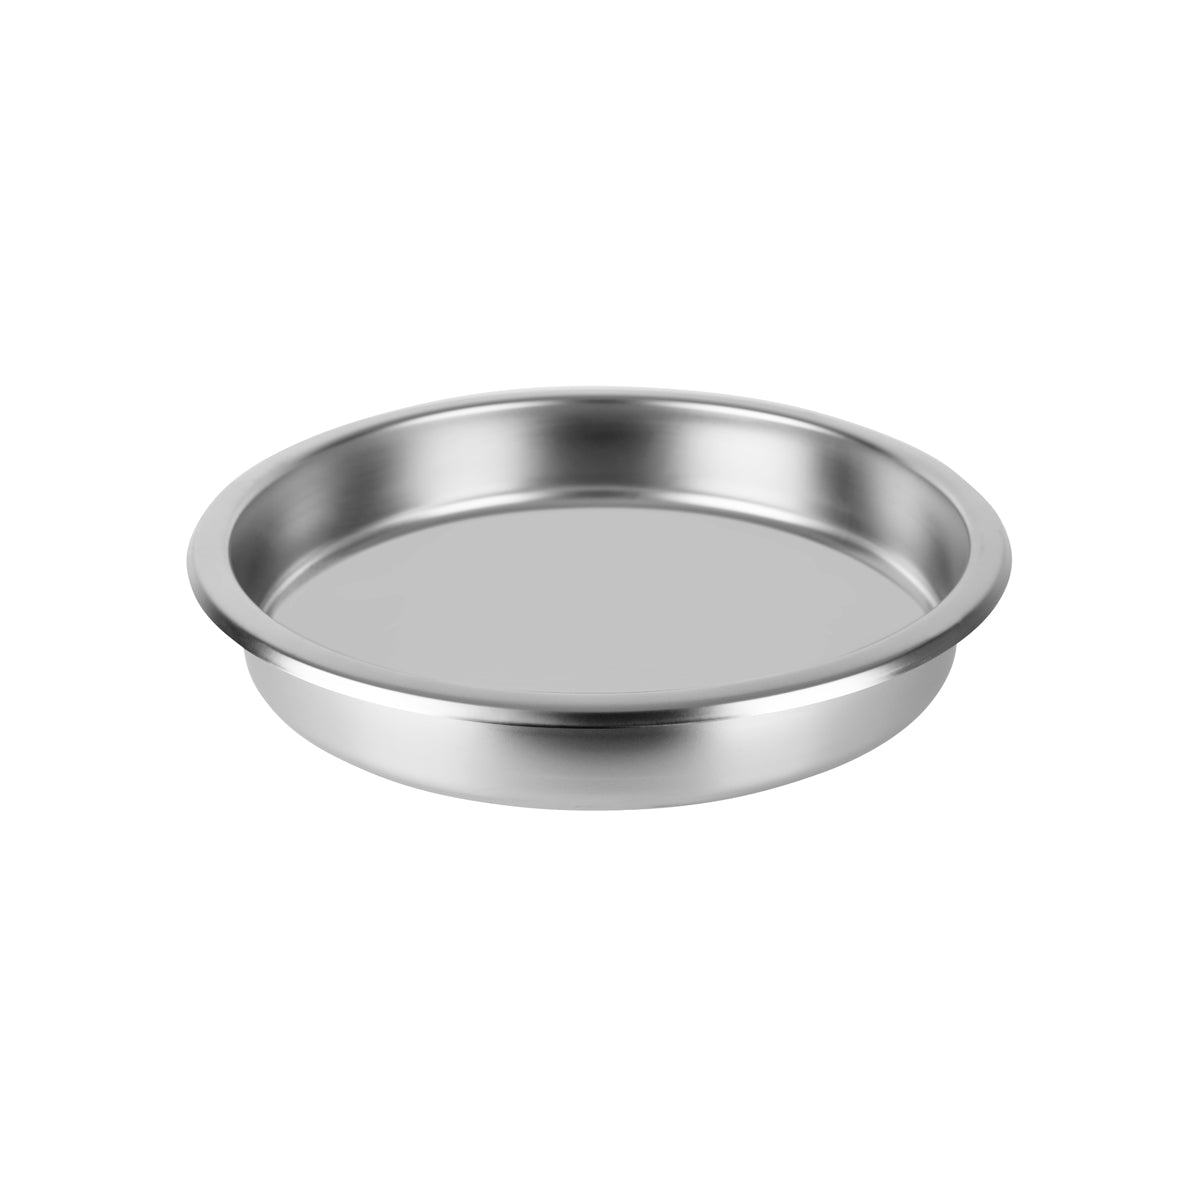 54906-I Chef Inox Round Insert Pan Stainless Steel to Suit 54906 Tomkin Australia Hospitality Supplies